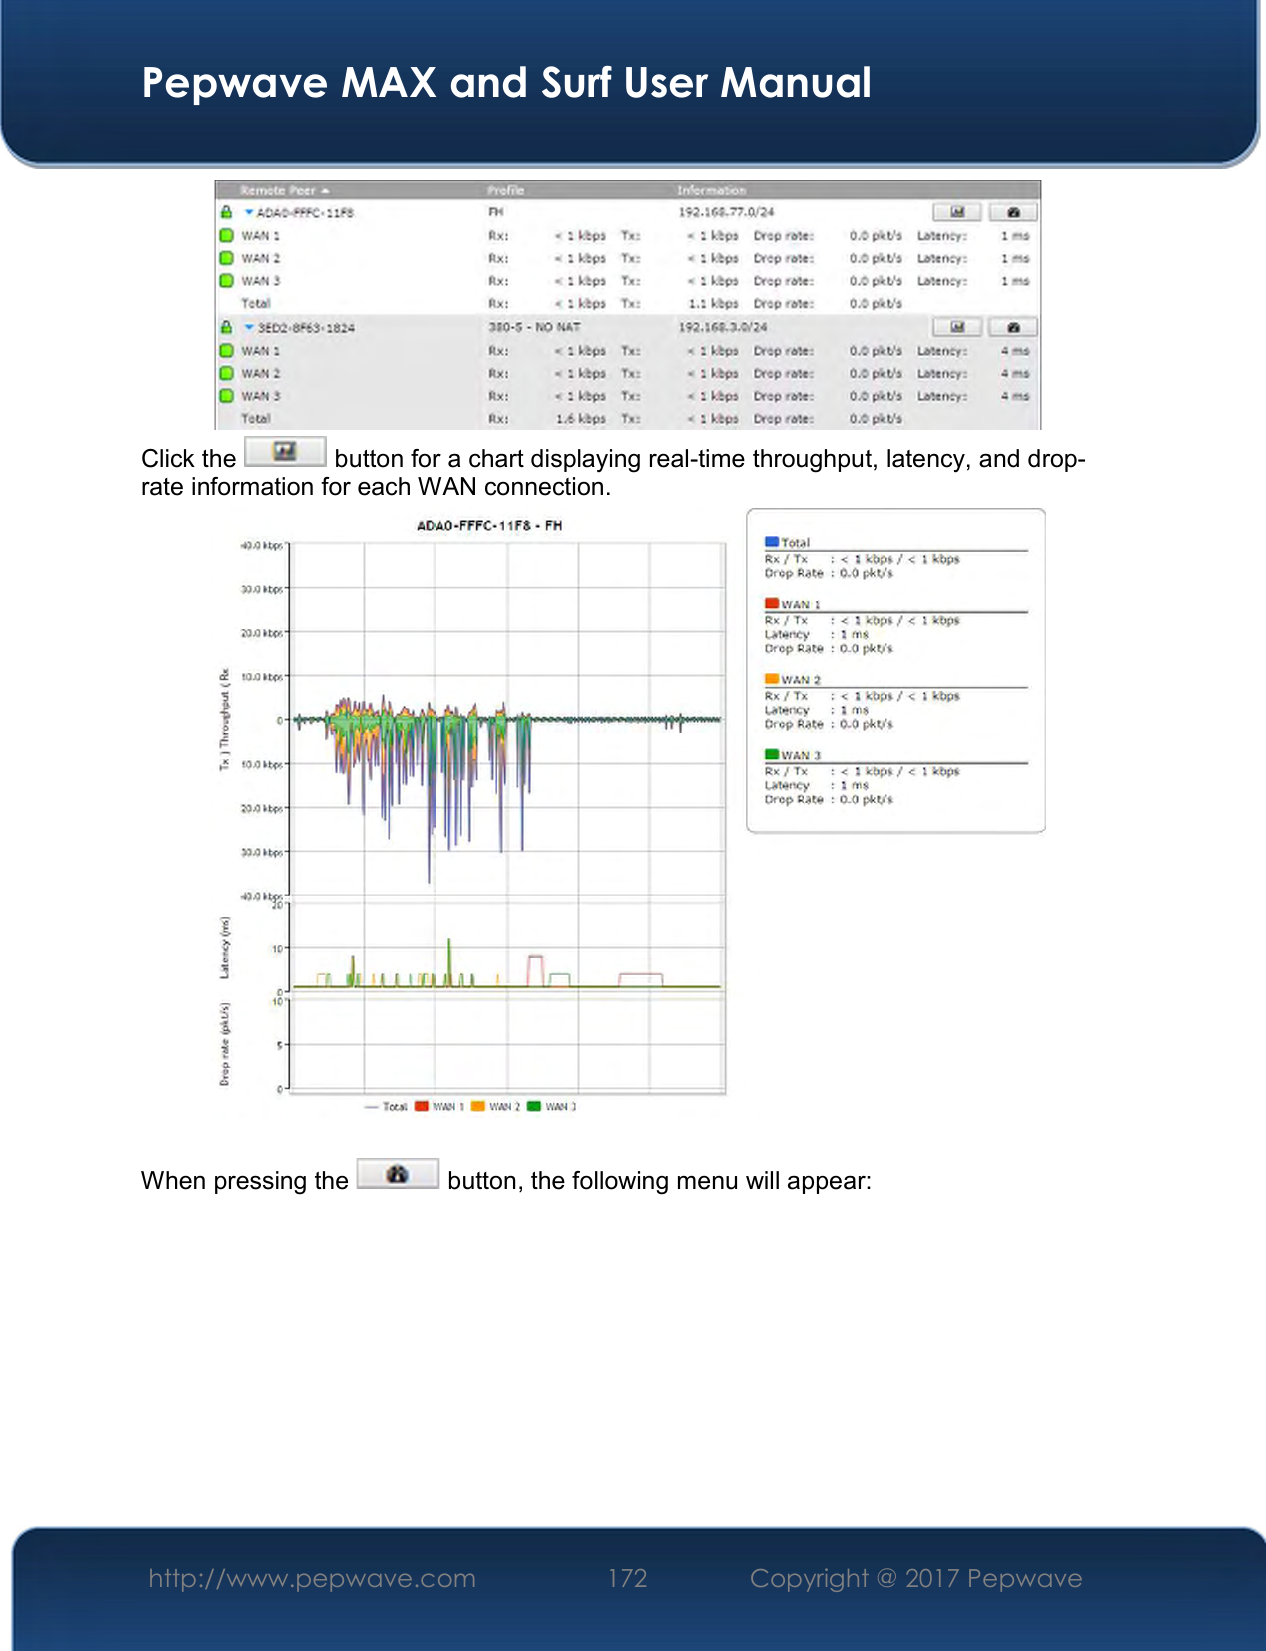  Pepwave MAX and Surf User Manual http://www.pepwave.com  172    Copyright @ 2017 Pepwave    Click the   button for a chart displaying real-time throughput, latency, and drop-rate information for each WAN connection.   When pressing the   button, the following menu will appear:  